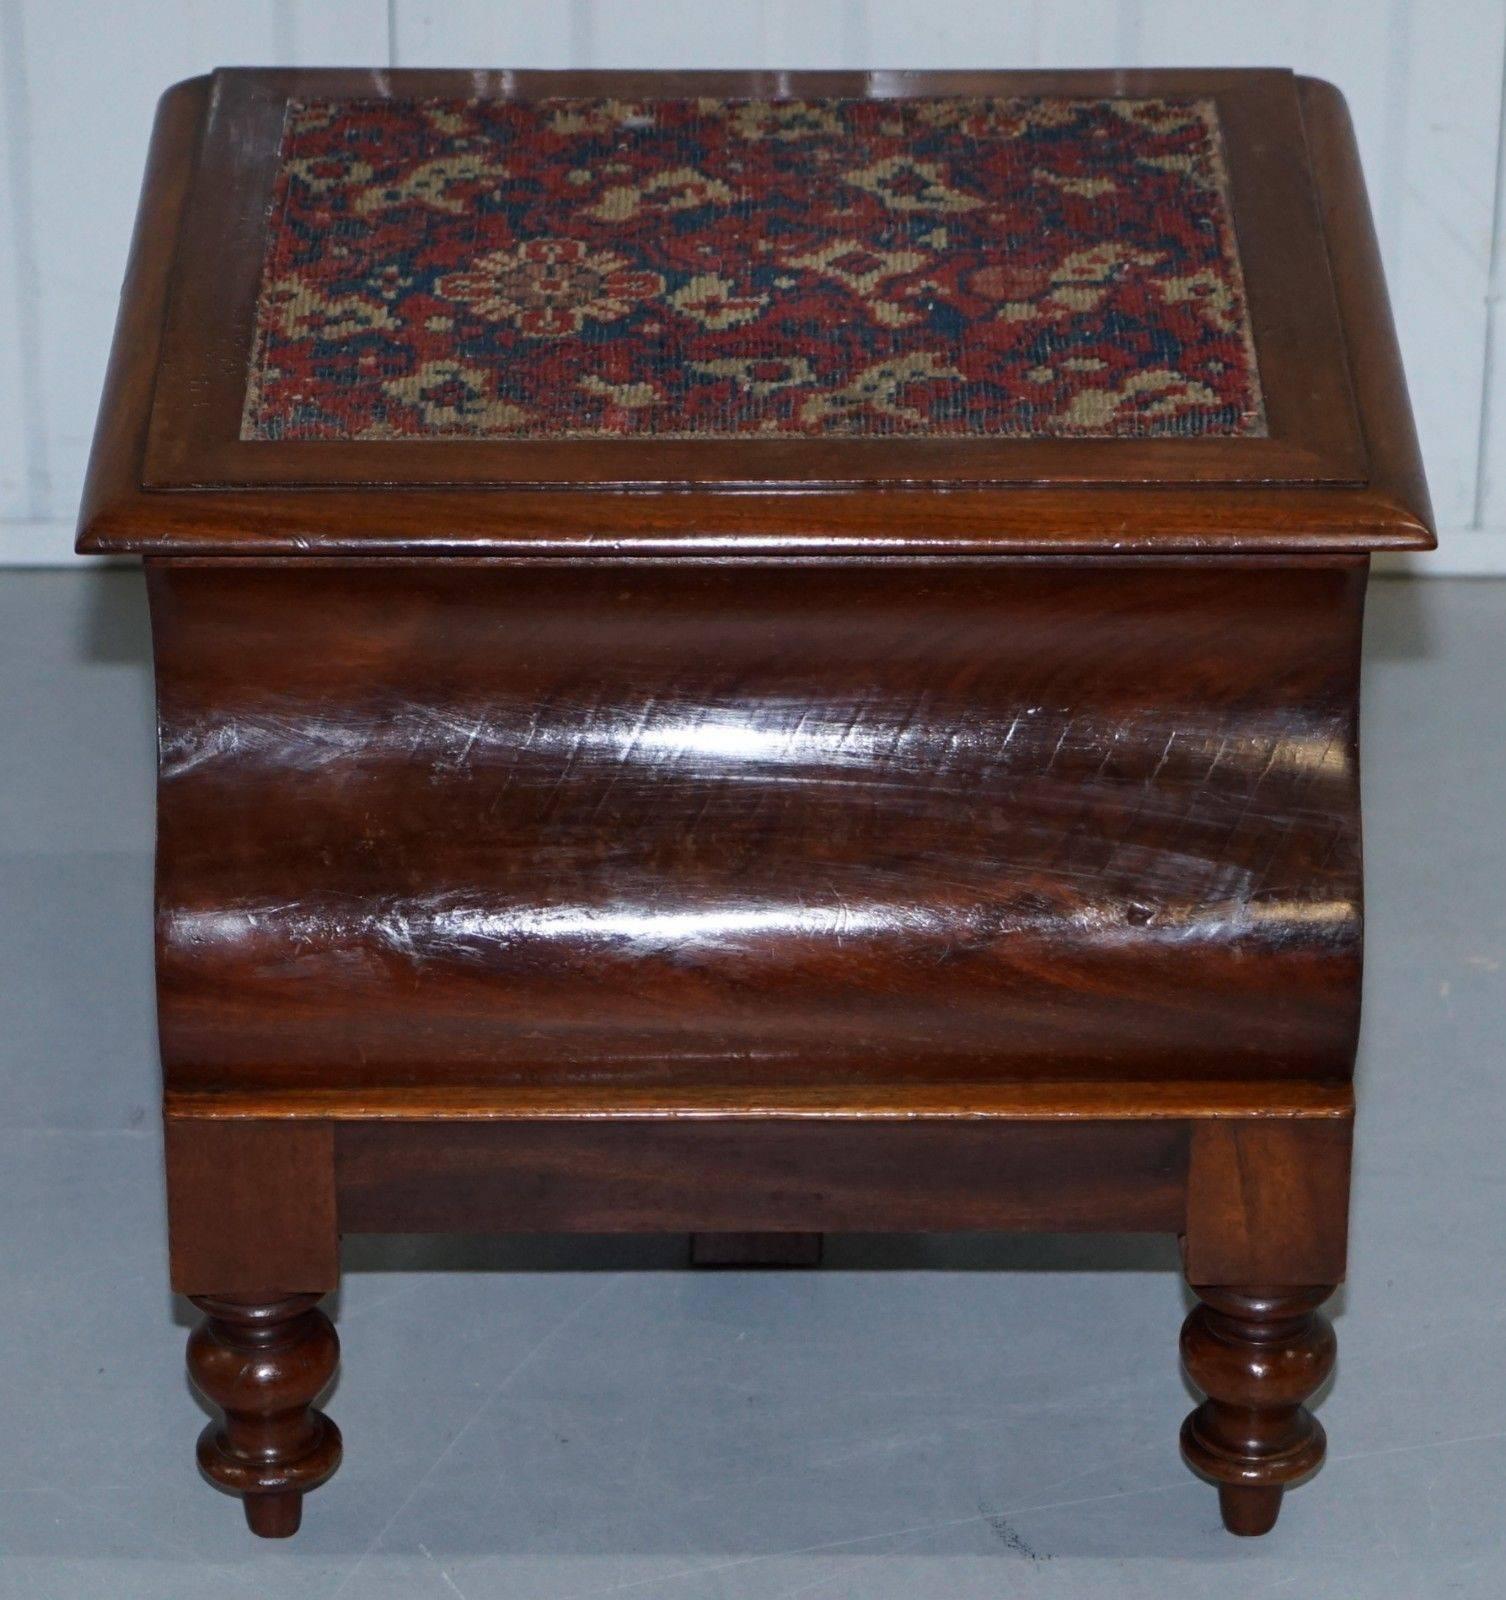 We are delighted to offer for sale this lovely complete and original American Victorian bed stool step with built in chamber pot

A good looking and decorative little step, its rare to find these with the original pot in, this has the pot, timber